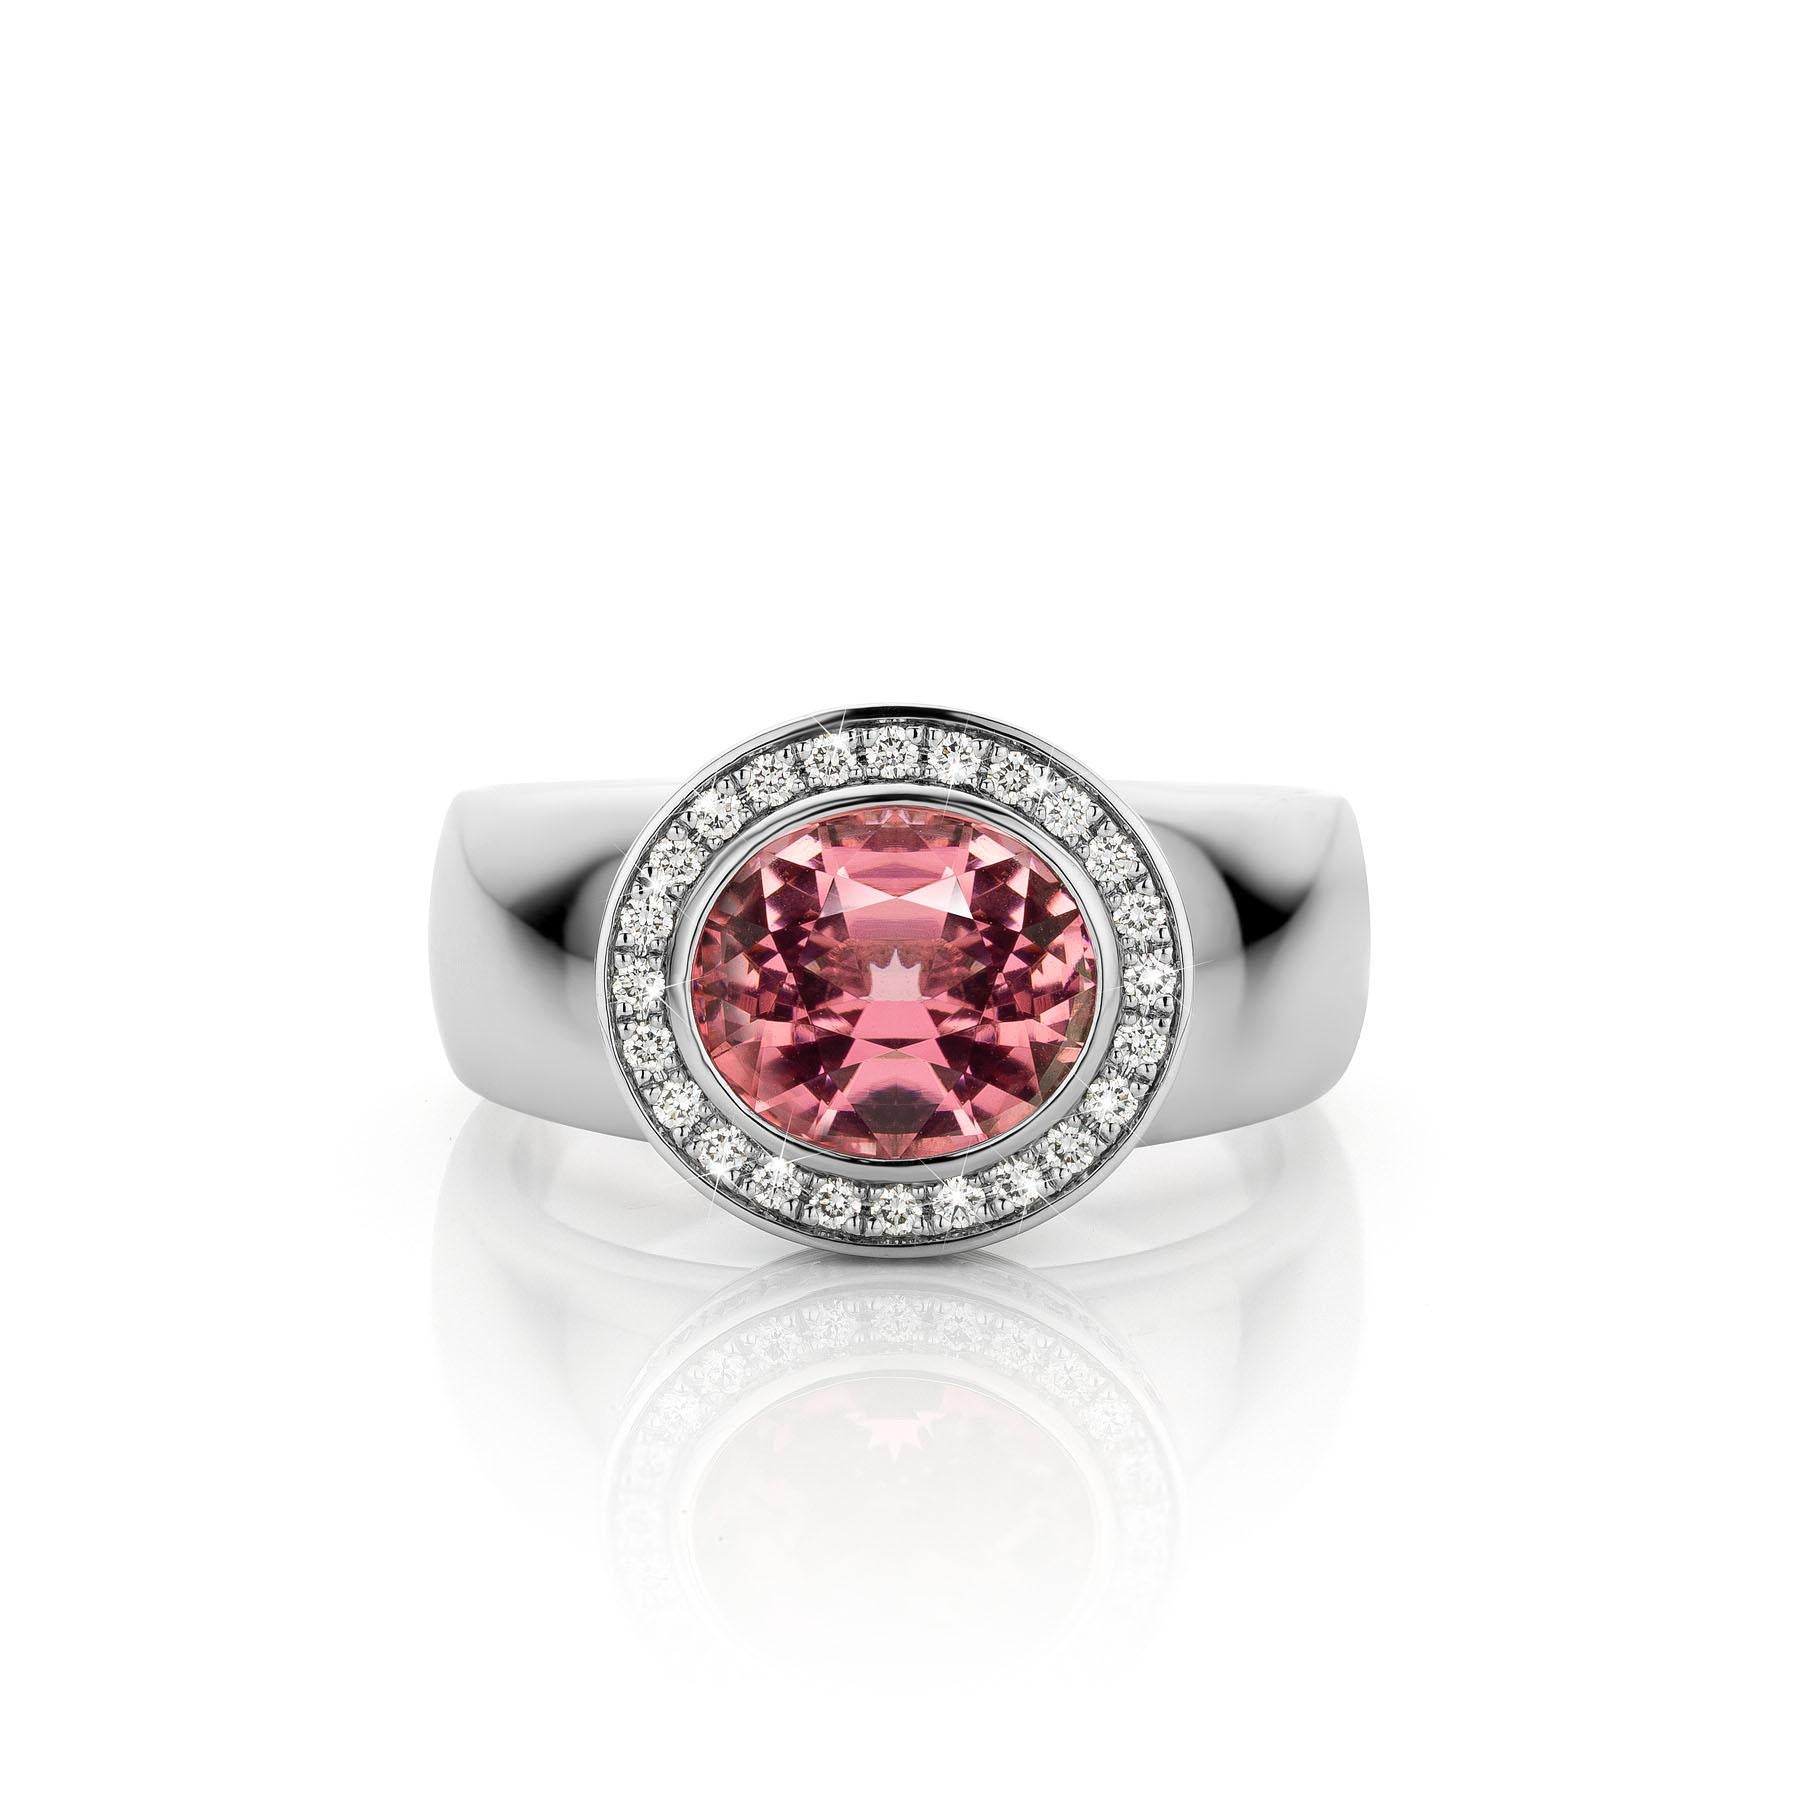 Brilliant Cut Cober “Something Royal”with clear pink Tourmaline surrounded by 43 Diamonds Ring For Sale